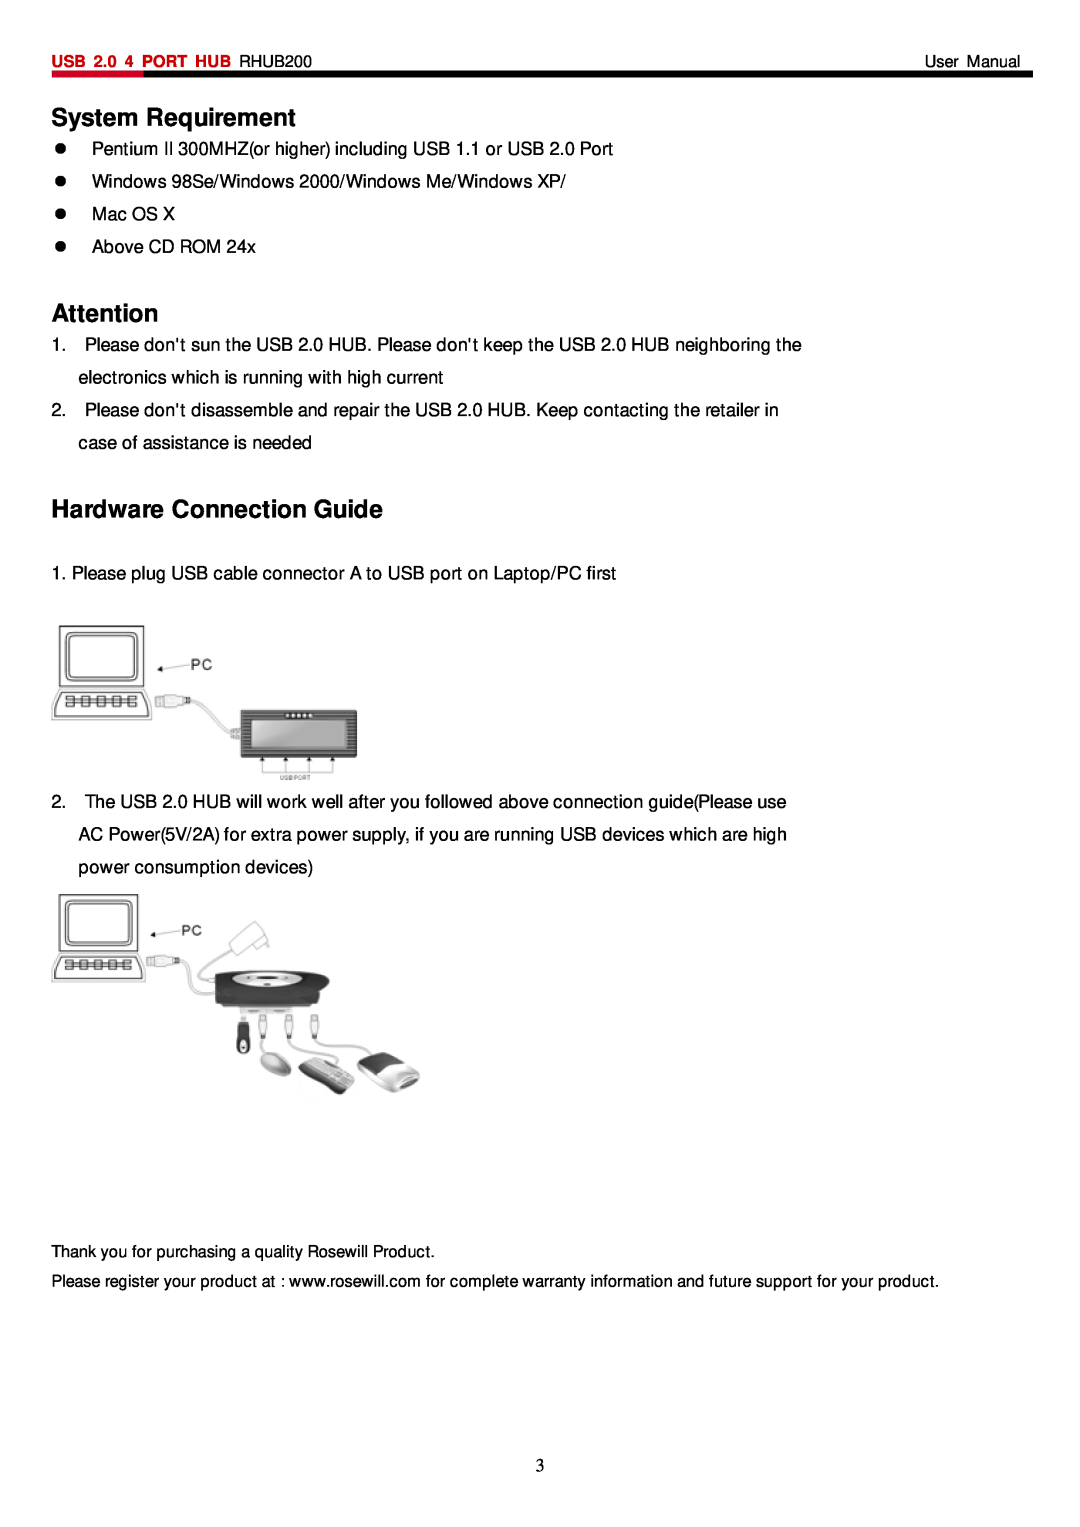 Rosewill RHUB-200 user manual System Requirement, Hardware Connection Guide 